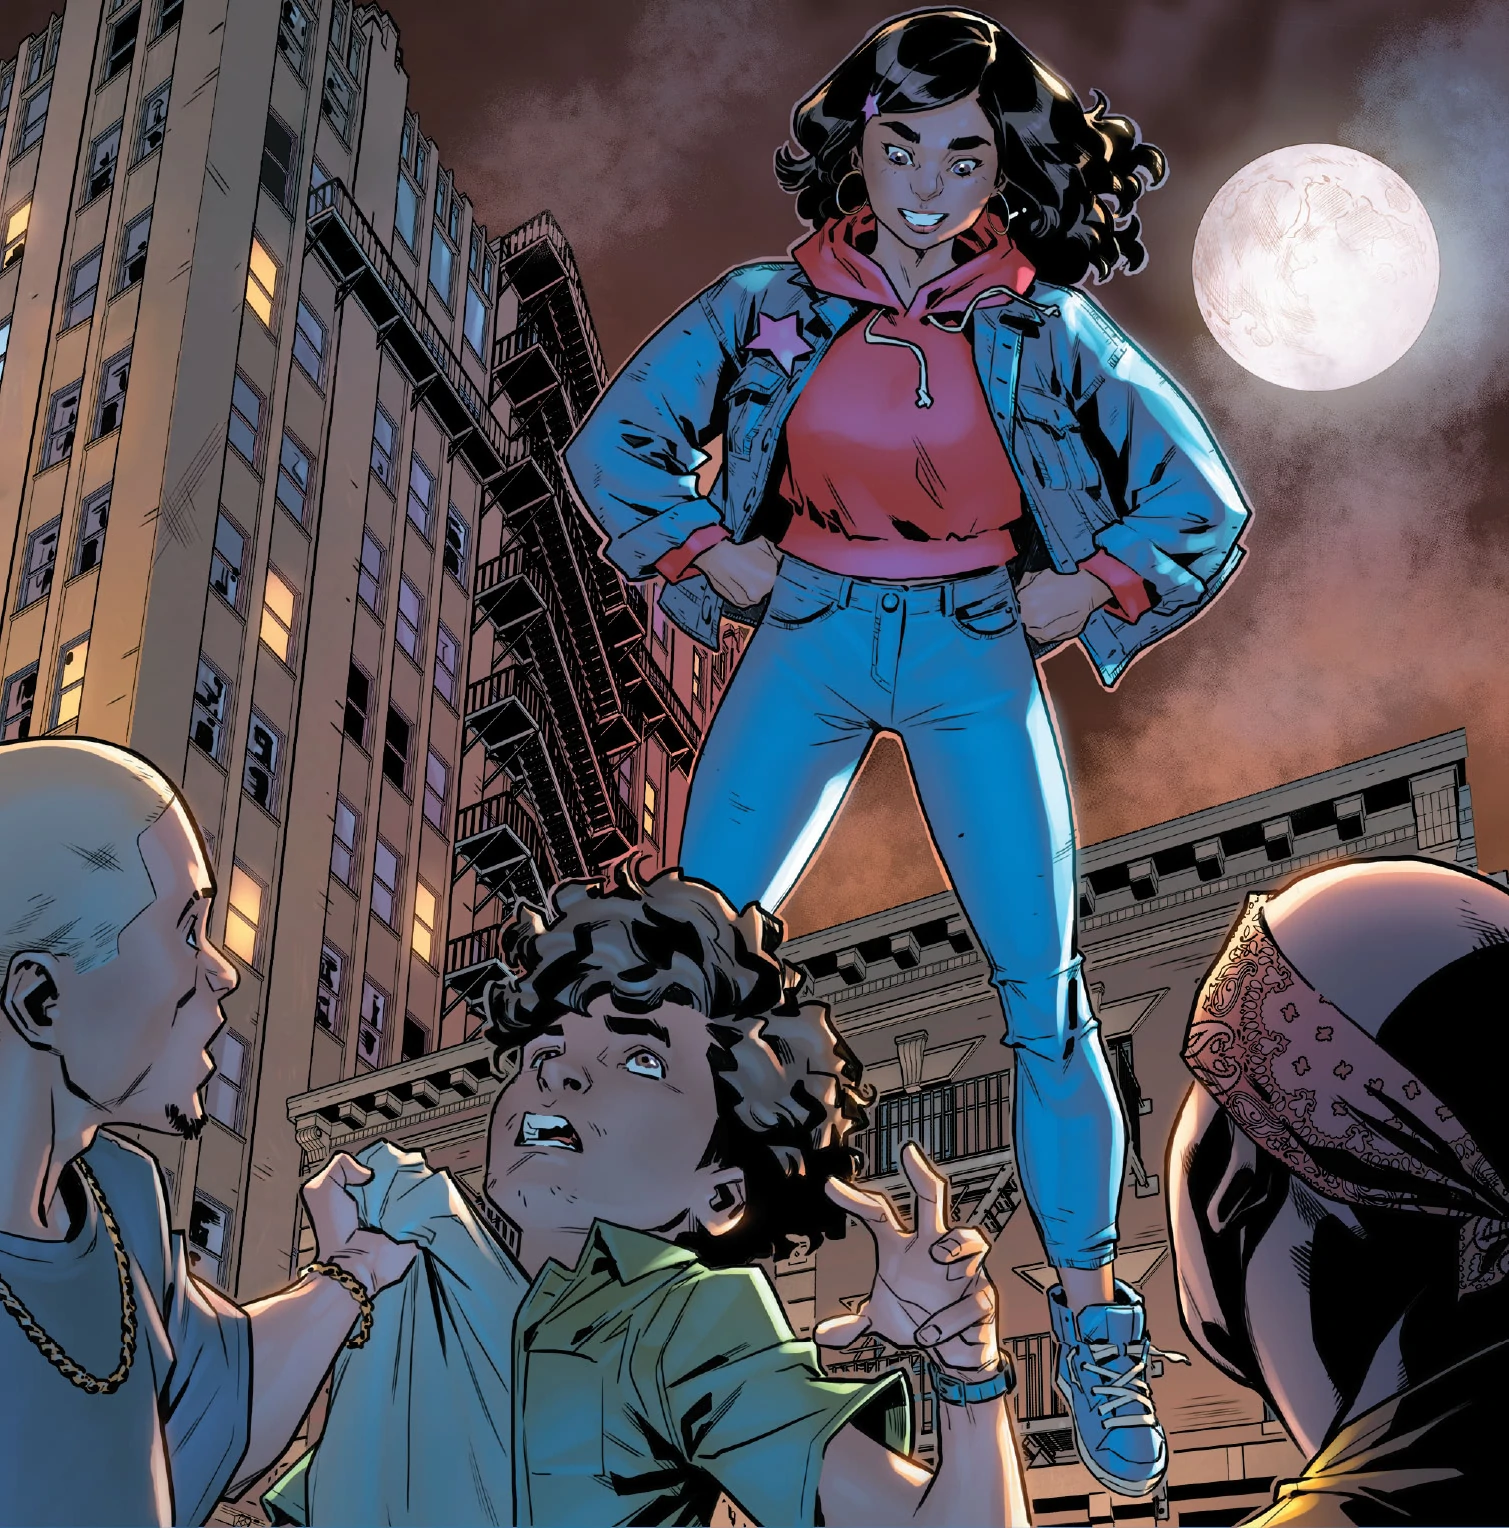 AMERICA CHAVEZ FIRST APPEARED IN COMIC BOOK